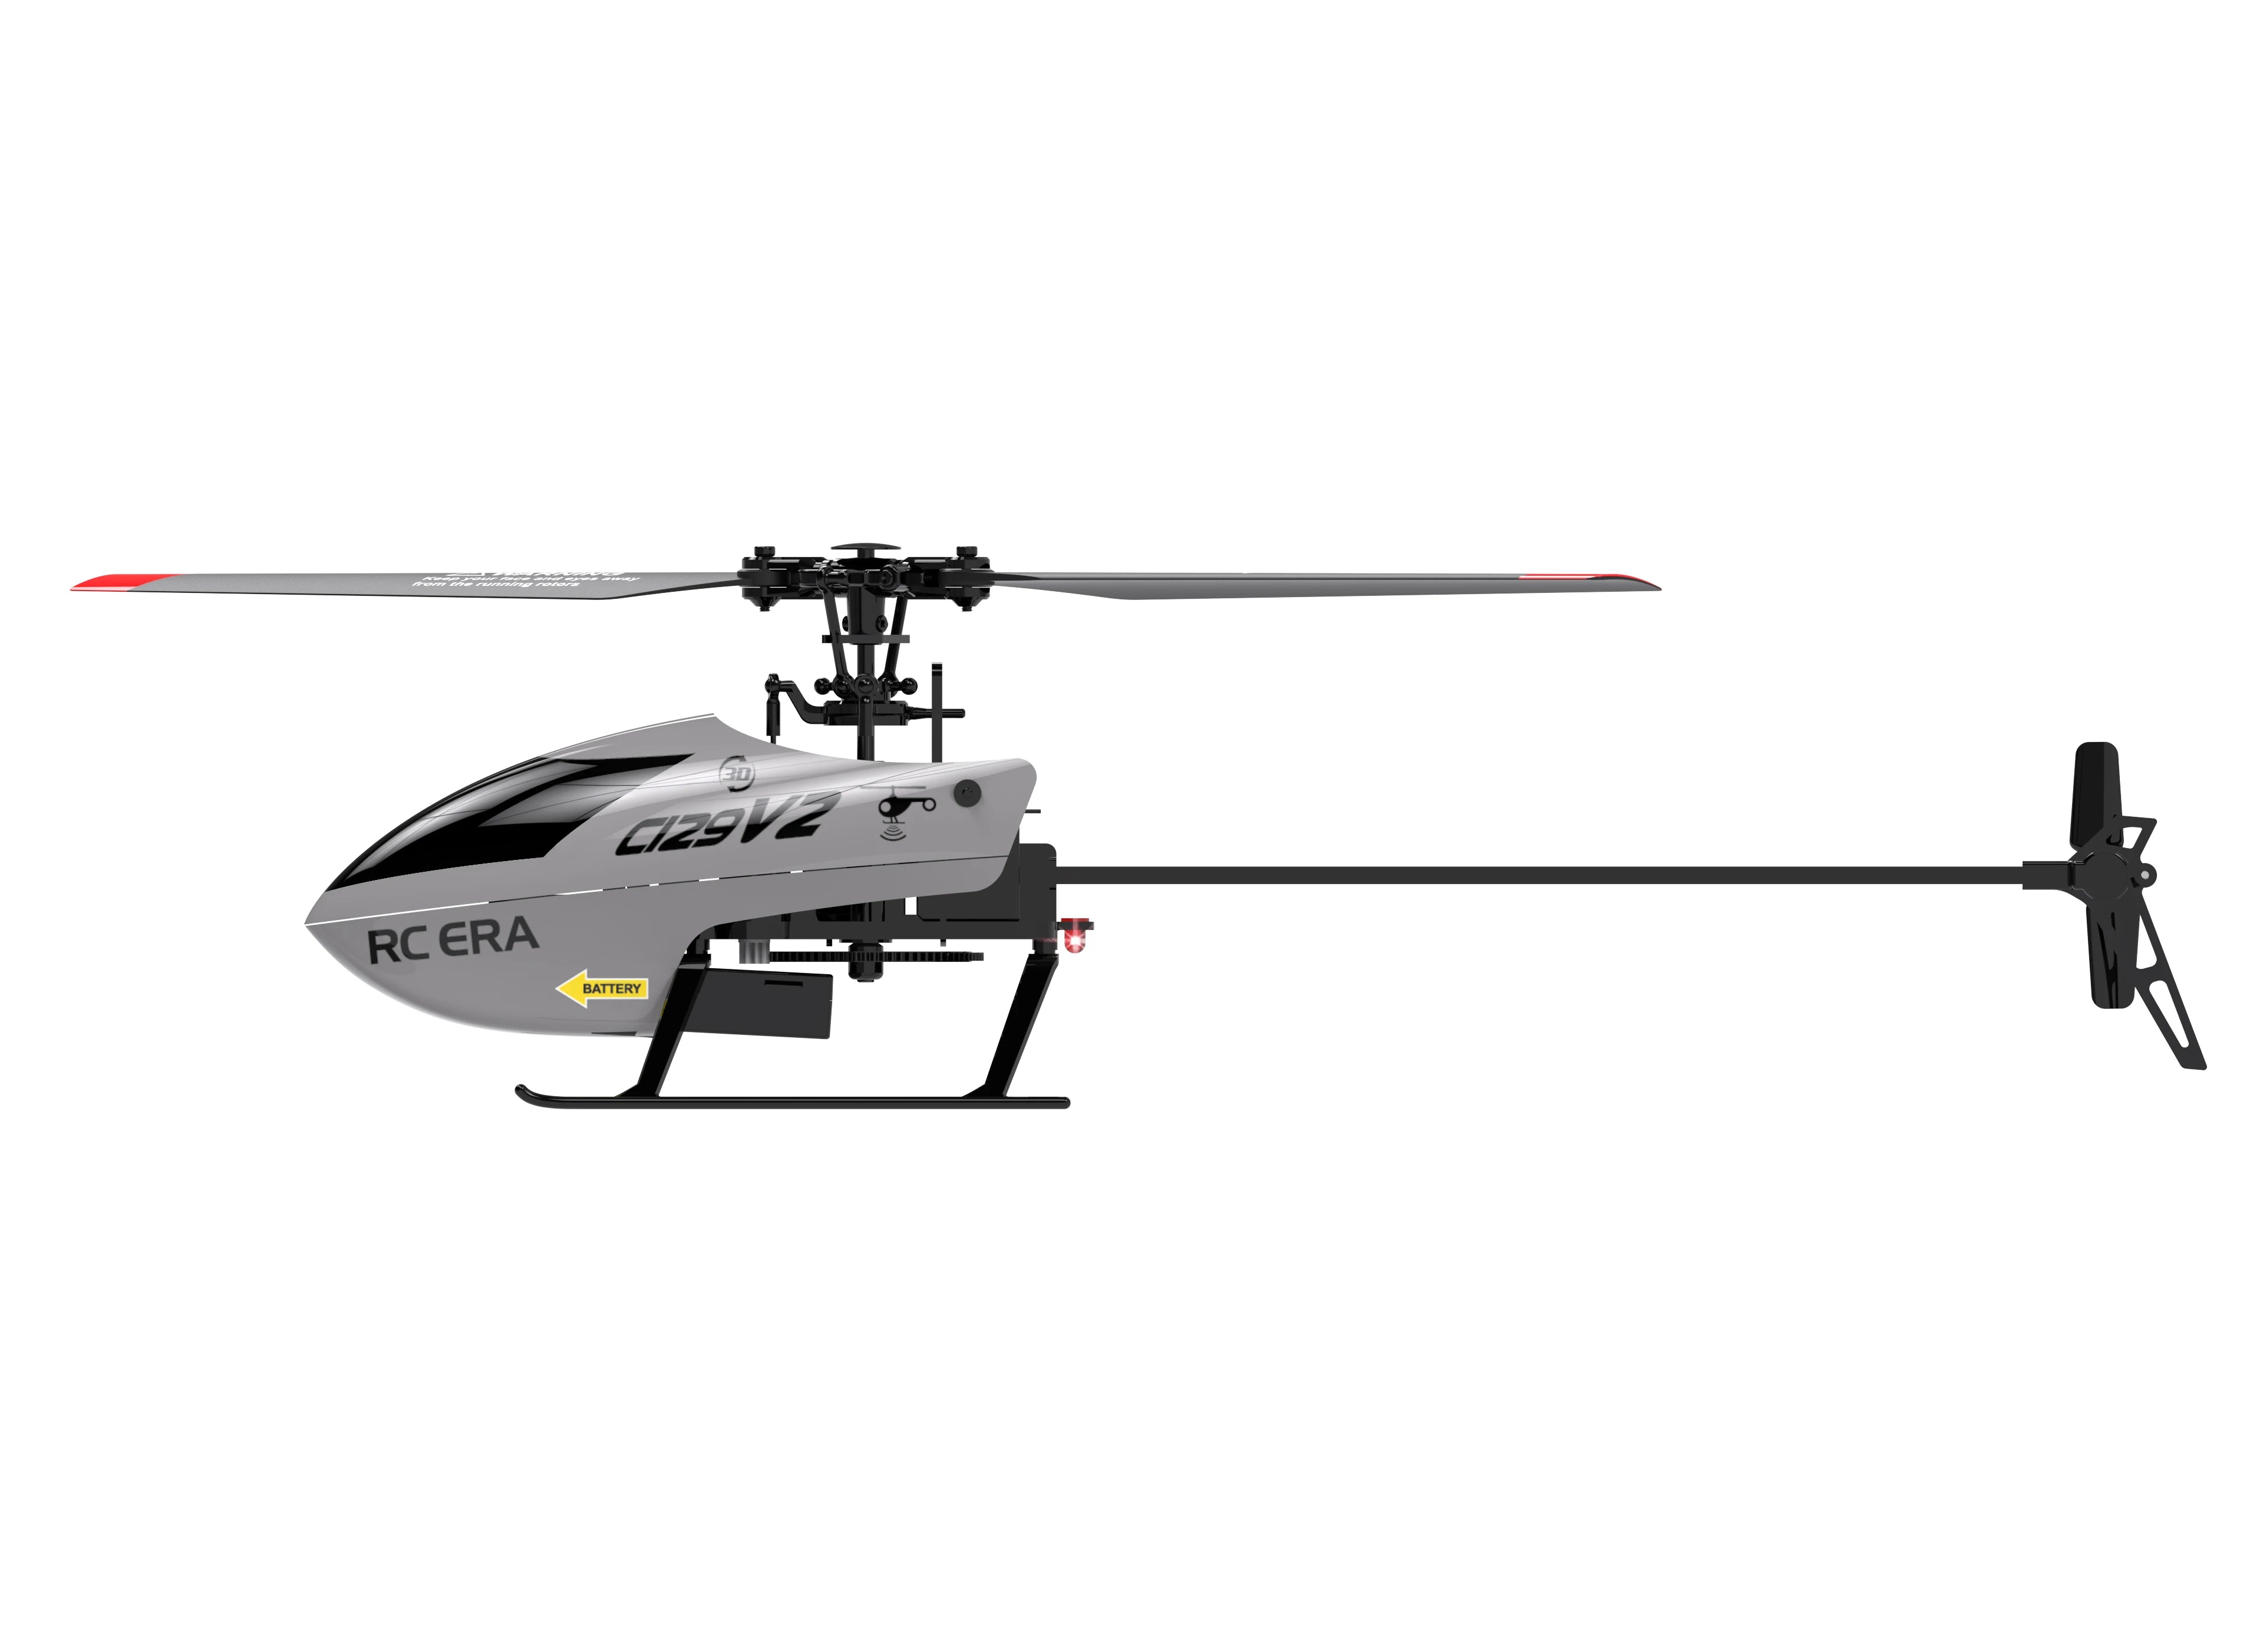 C129 V2 RC Helicopter, the propeller is designed according to the aerodynamic principle to provide strong power and airframe self